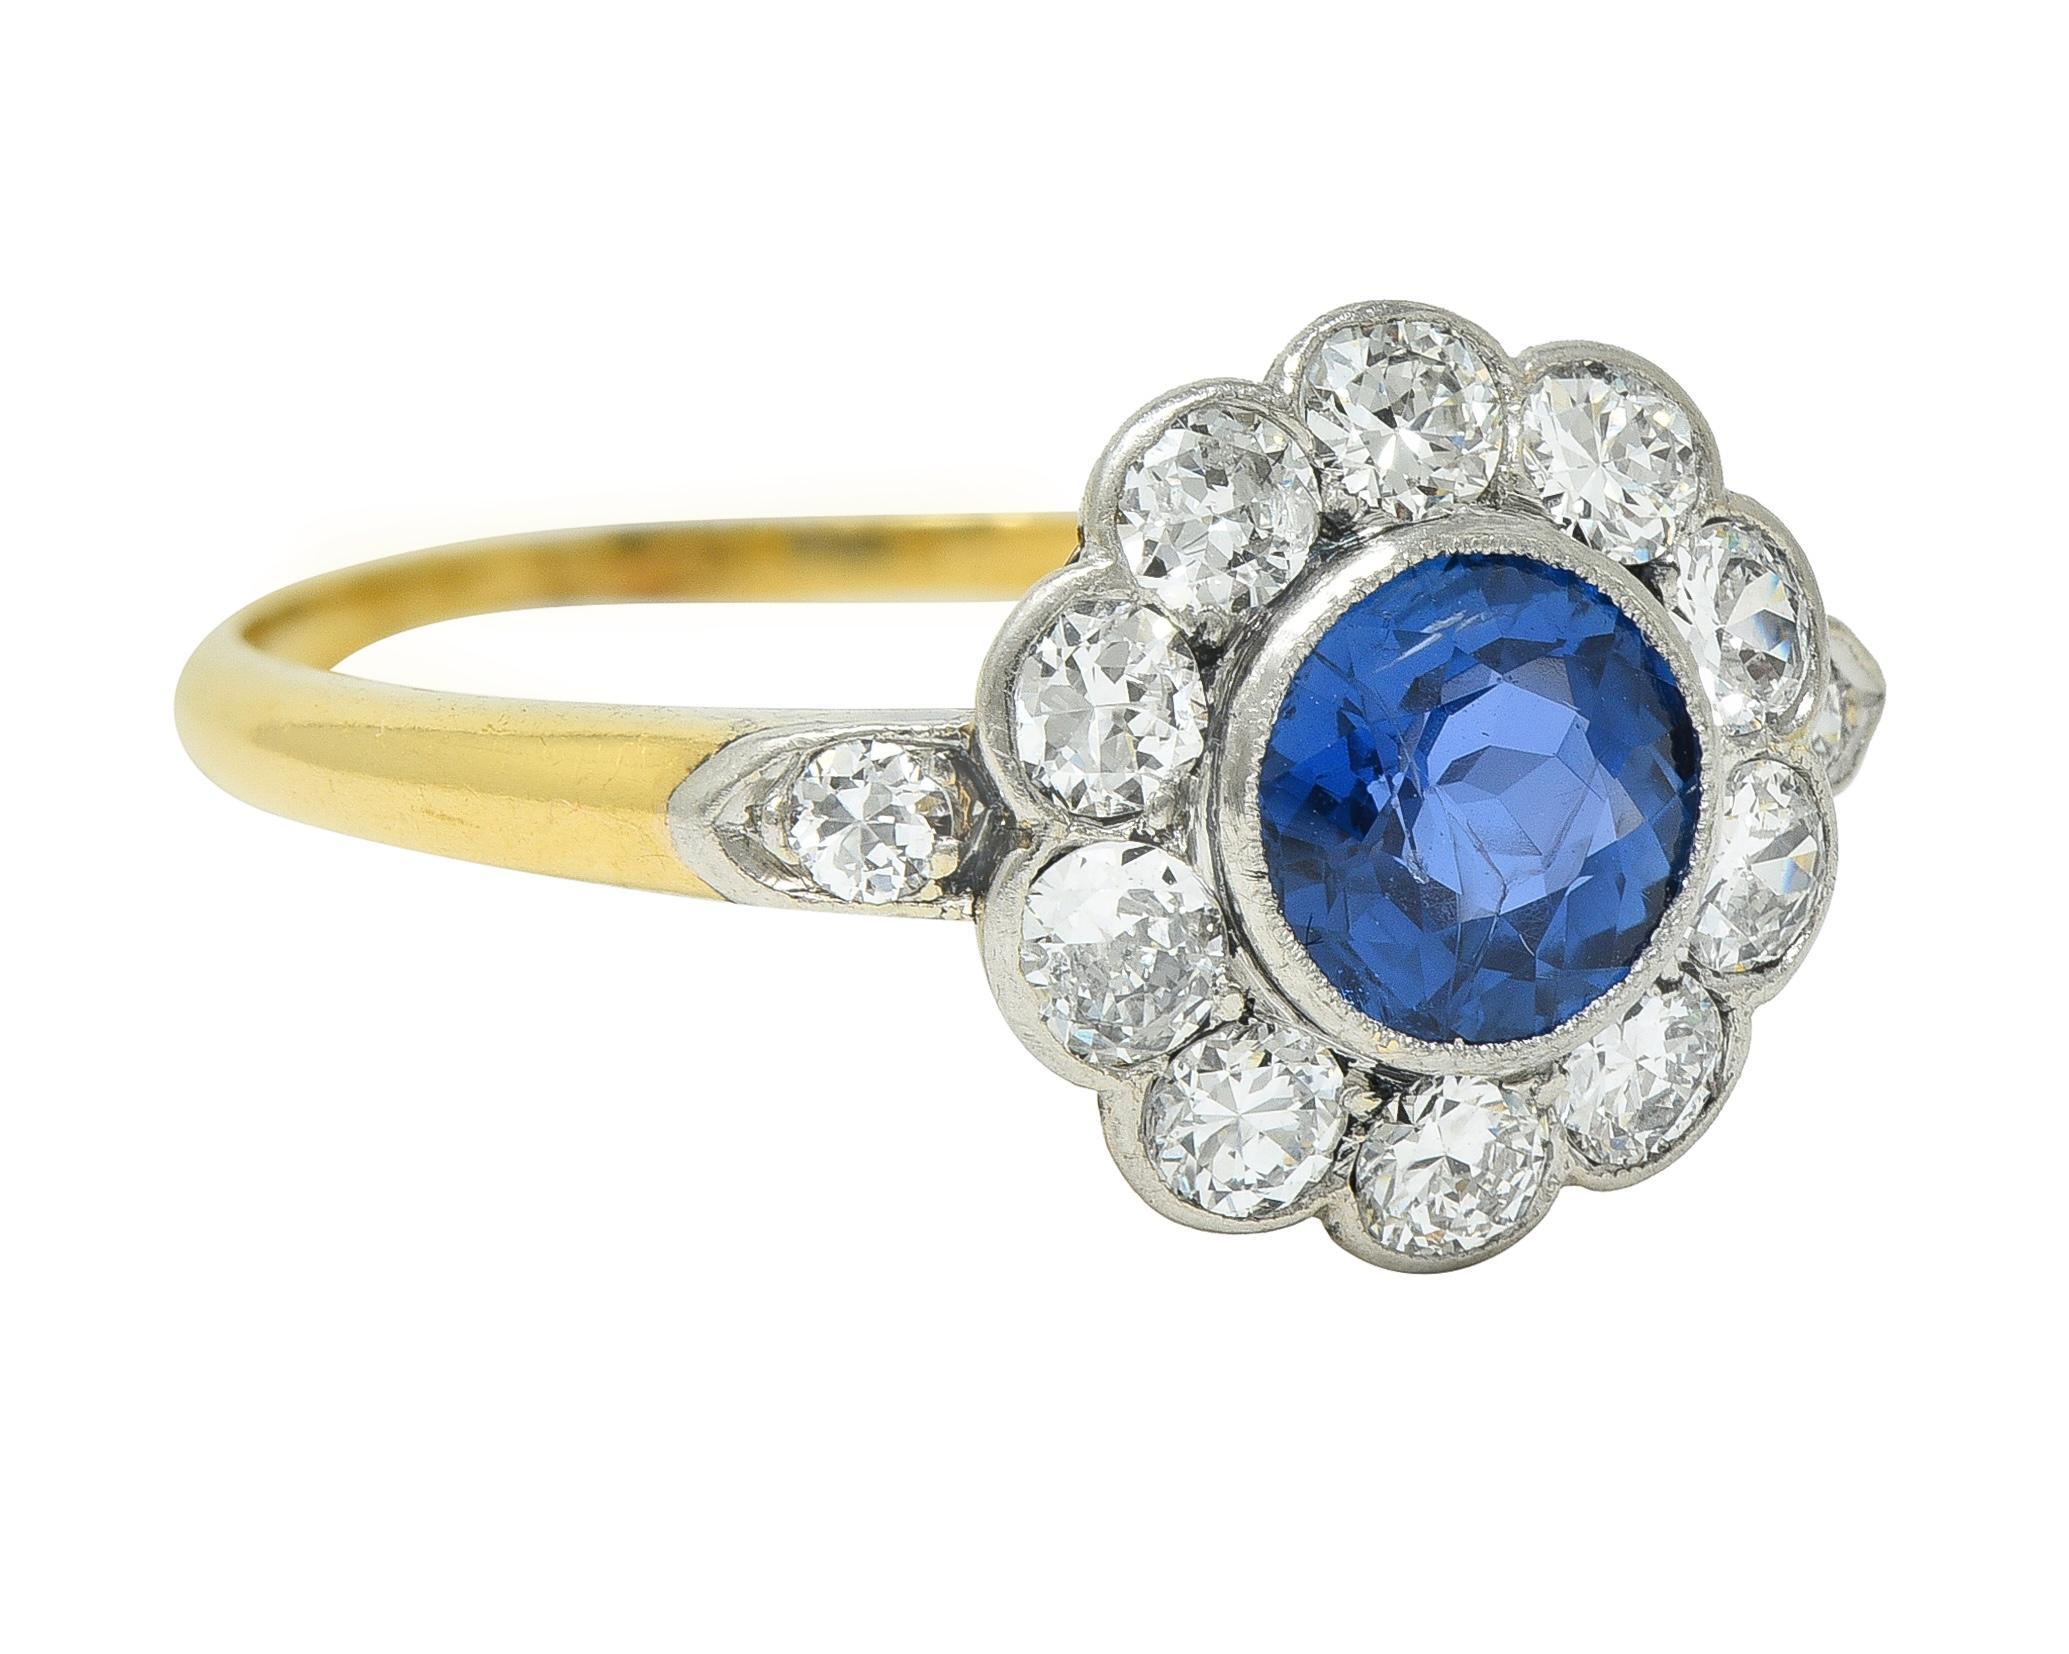 Centering a round cut sapphire weighing 1.00 carats - transparent medium blue in color 
Natural Burmese in origin and displaying no indications of heat treatment
Bezel set in platinum-topped head with milgrain halo surround and shoulders
Bead and